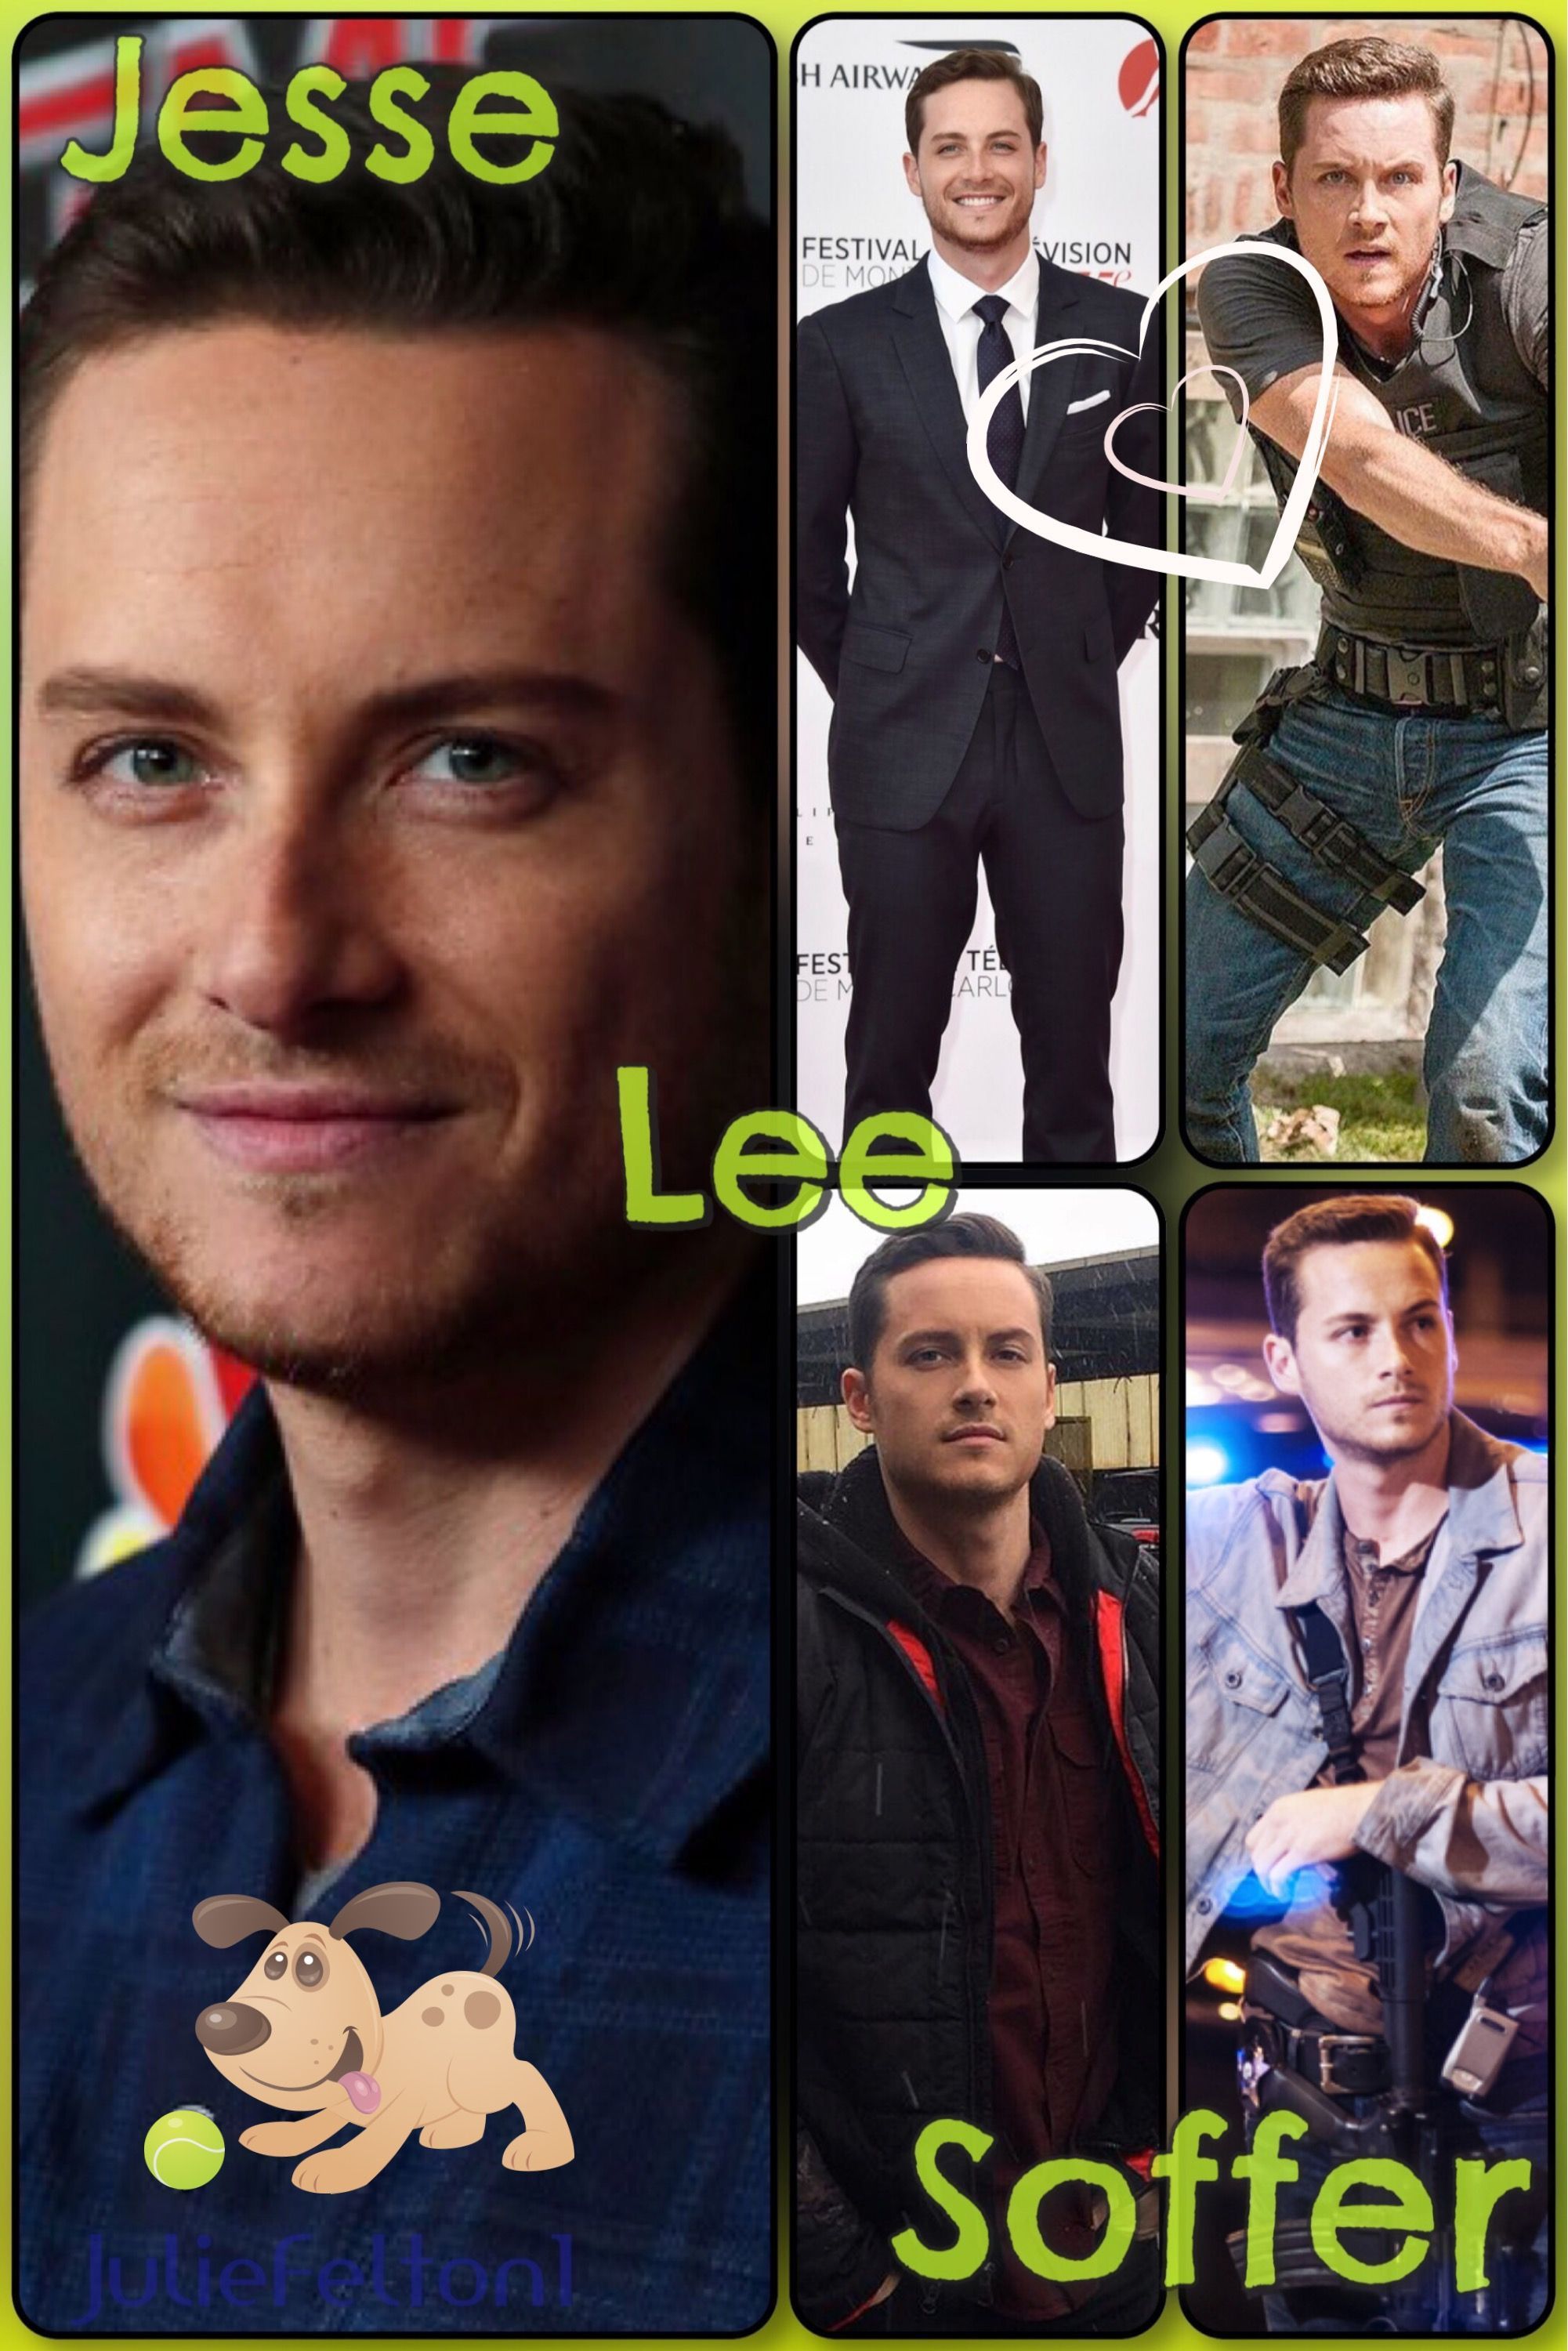 Jesse Lee Soffer Movies and TV Shows